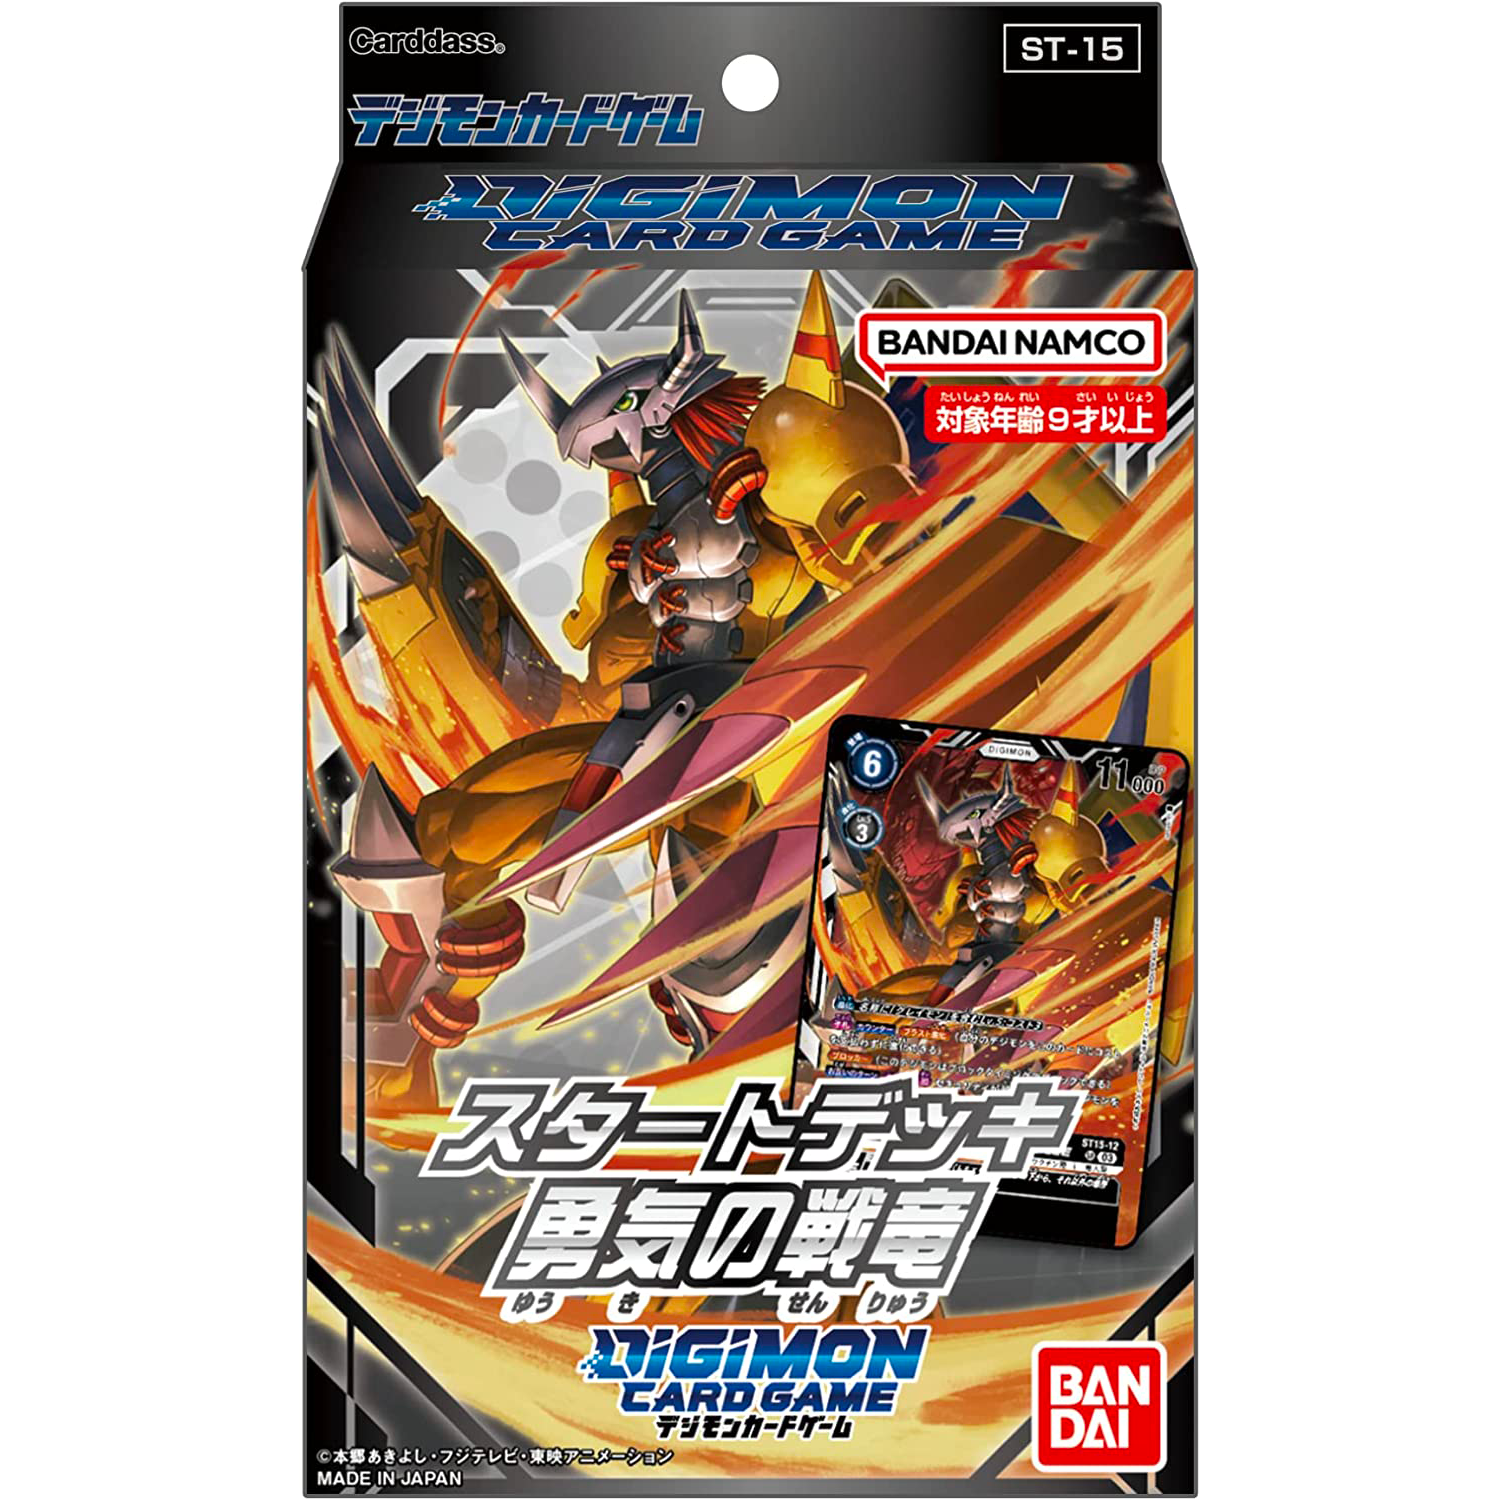 DIGIMON CARD GAME Starter Deck ｢WAR DRAGON OF COURAGE｣【ST-15】DIGIMON CARD GAME Starter Deck ｢WAR DRAGON OF COURAGE｣【ST-15】